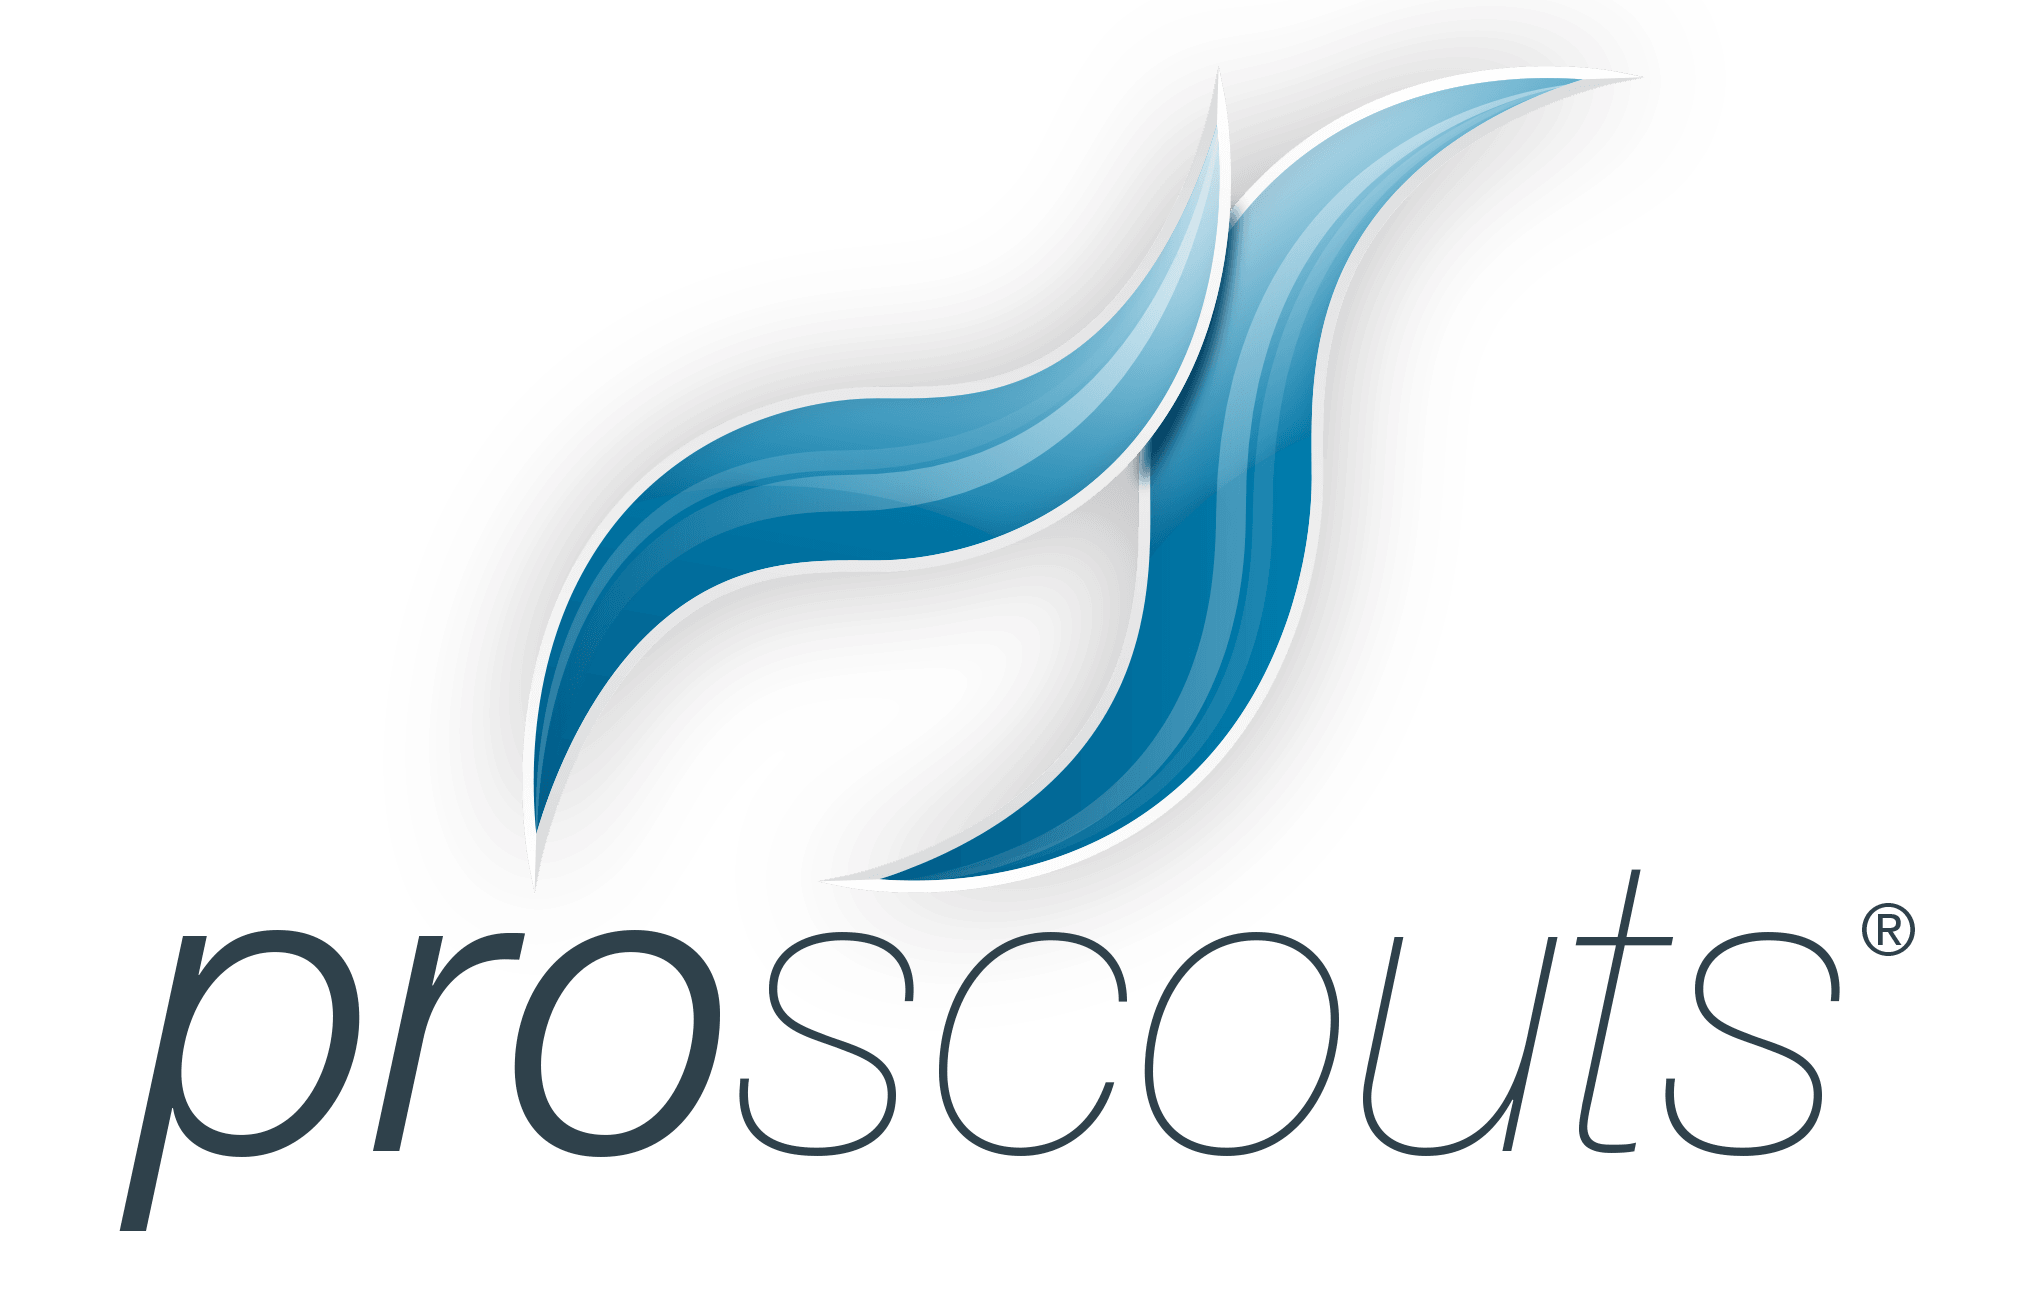 proscouts